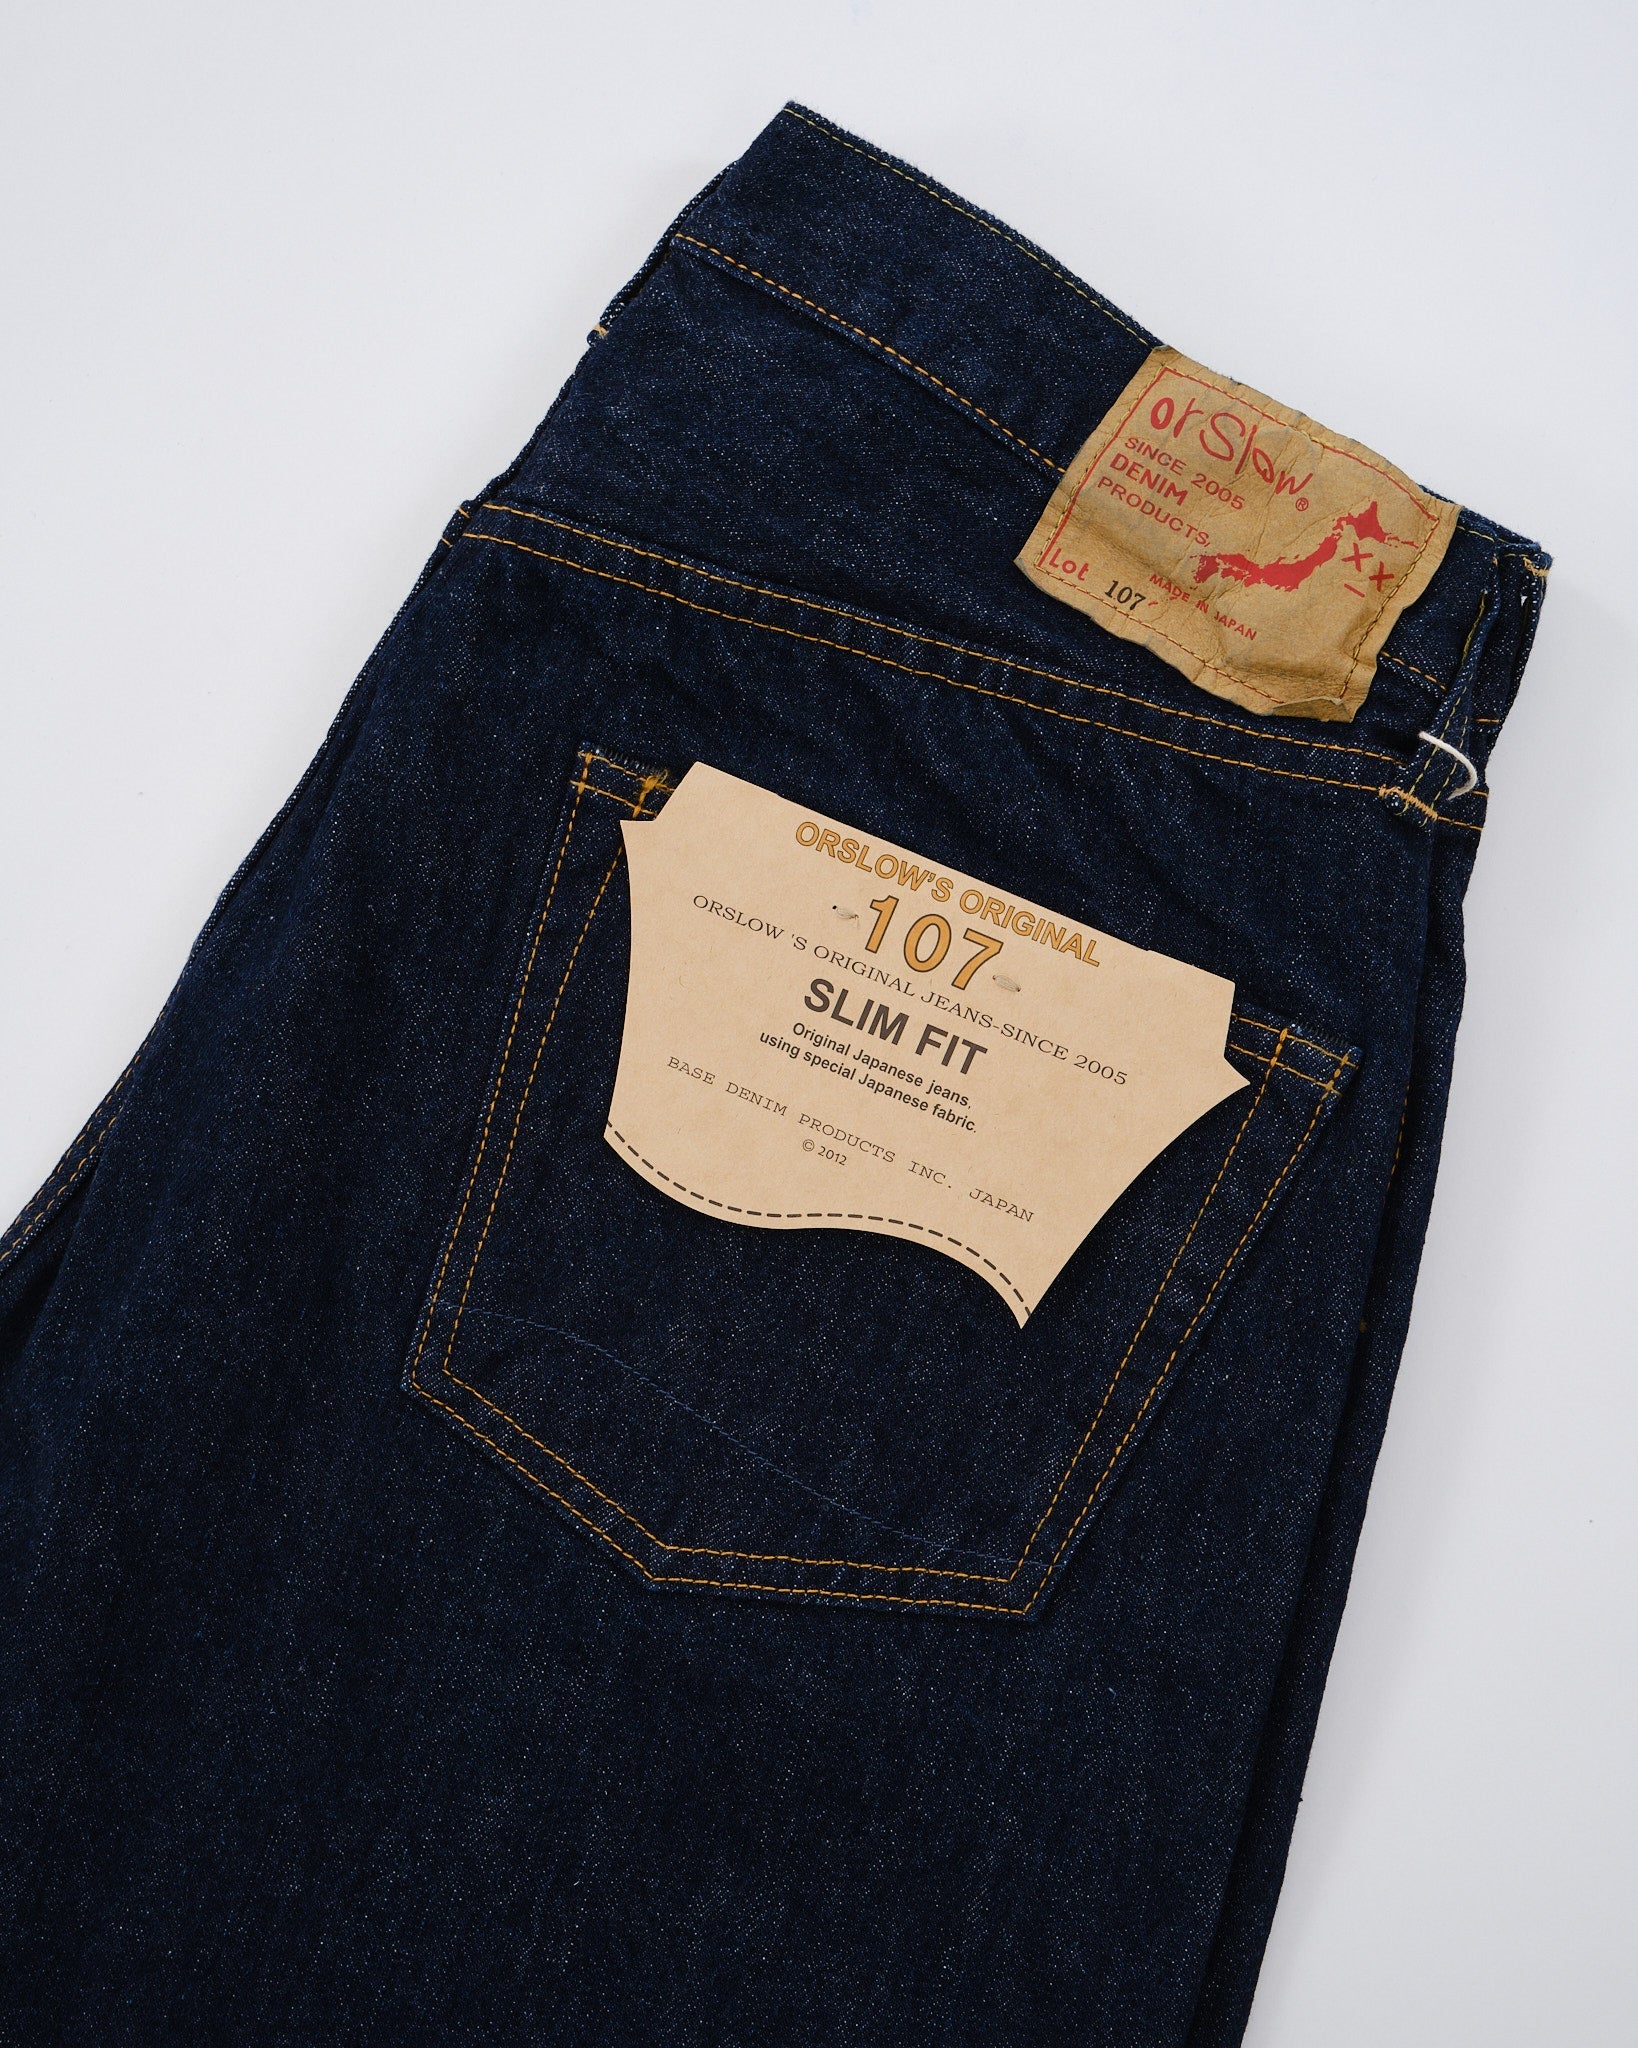 18 Important Things You Should Know About Your Raw Denim